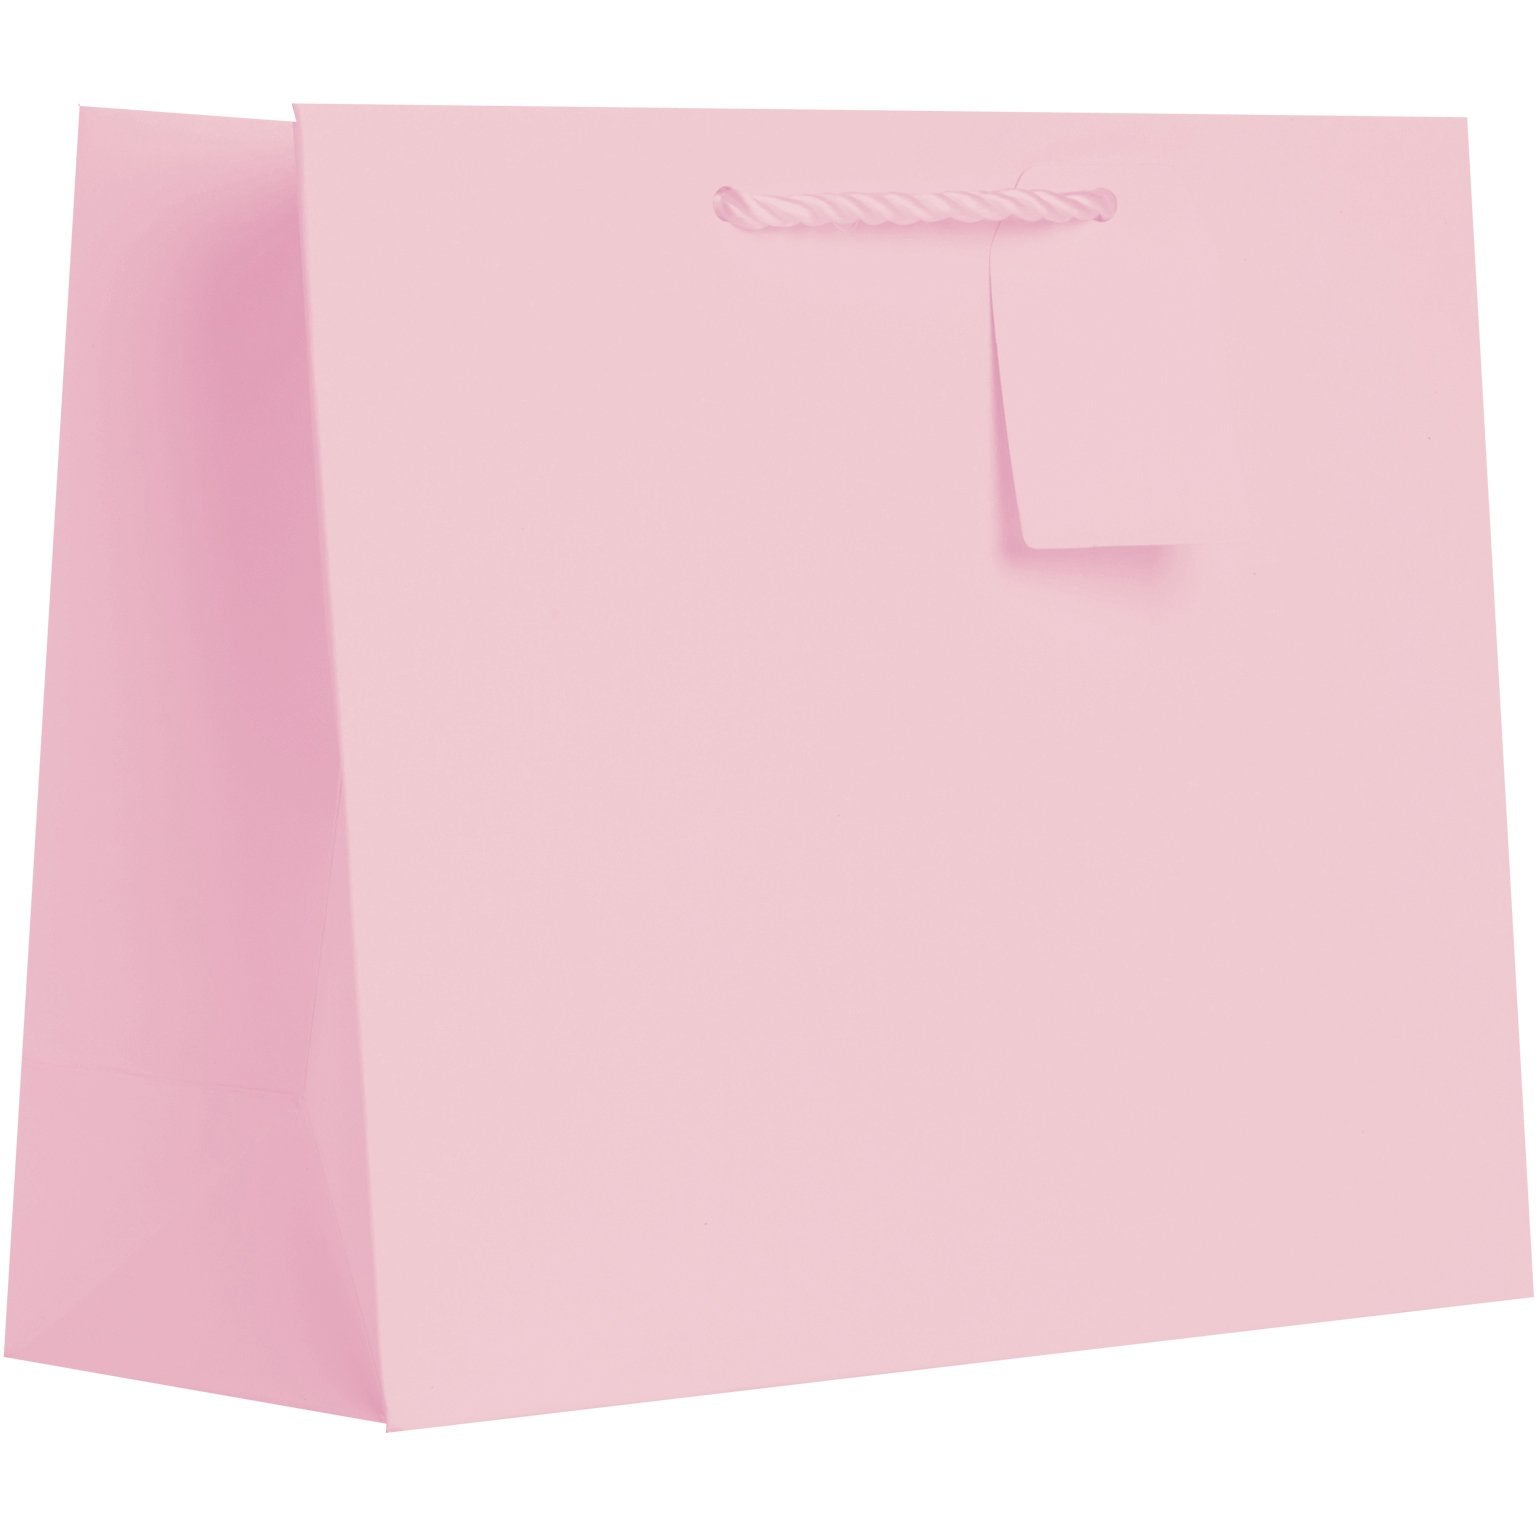 Heavyweight Solid Color Large Gift Bags, Matte Pastel Pink